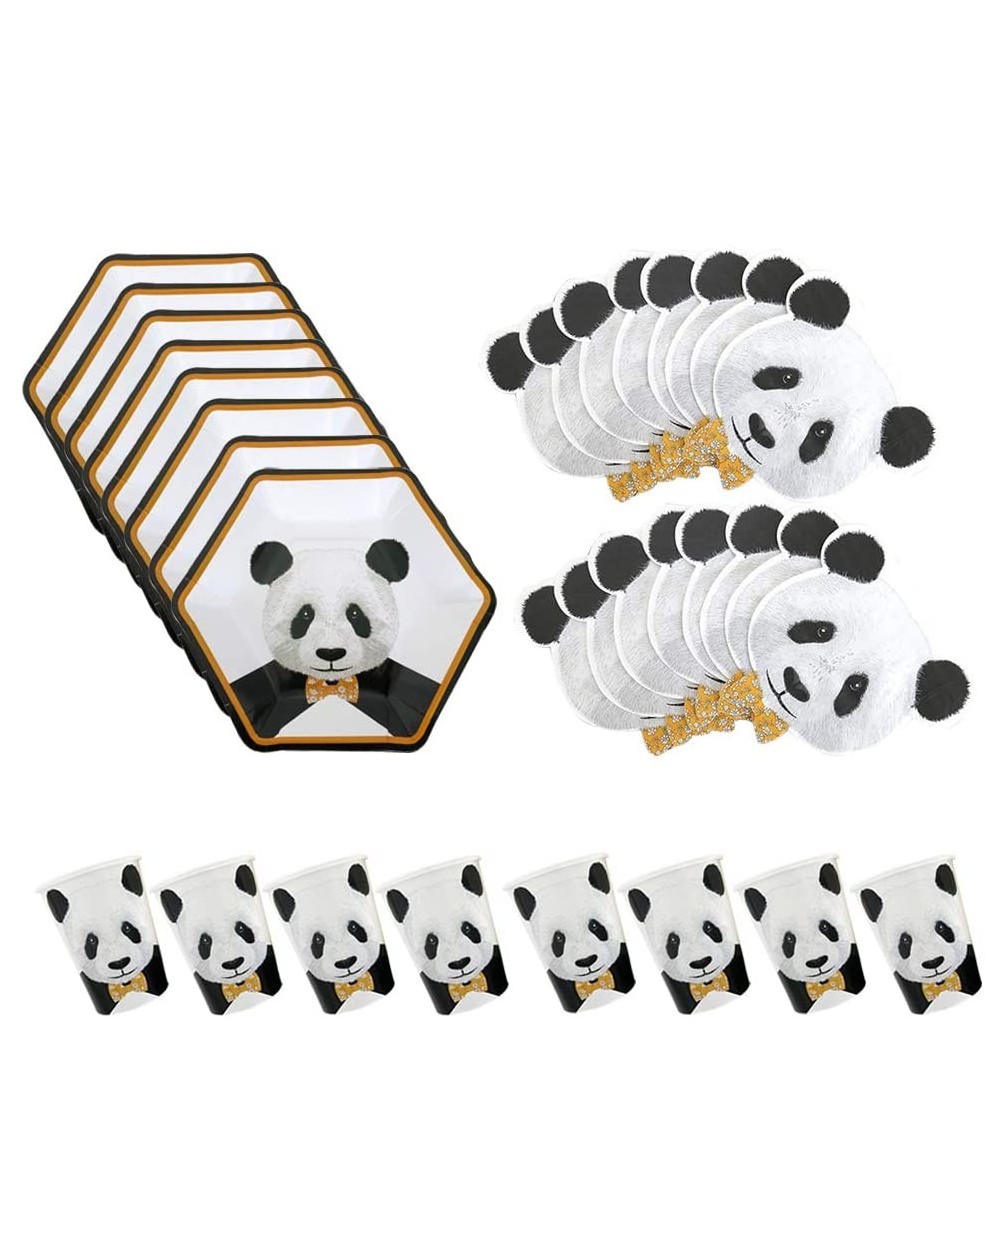 Party Packs 32 Pcs Panda Party Supplies Set- Birthday Decorations Tableware for Kids(Including Plates- Napkins- Cups) - Panda...